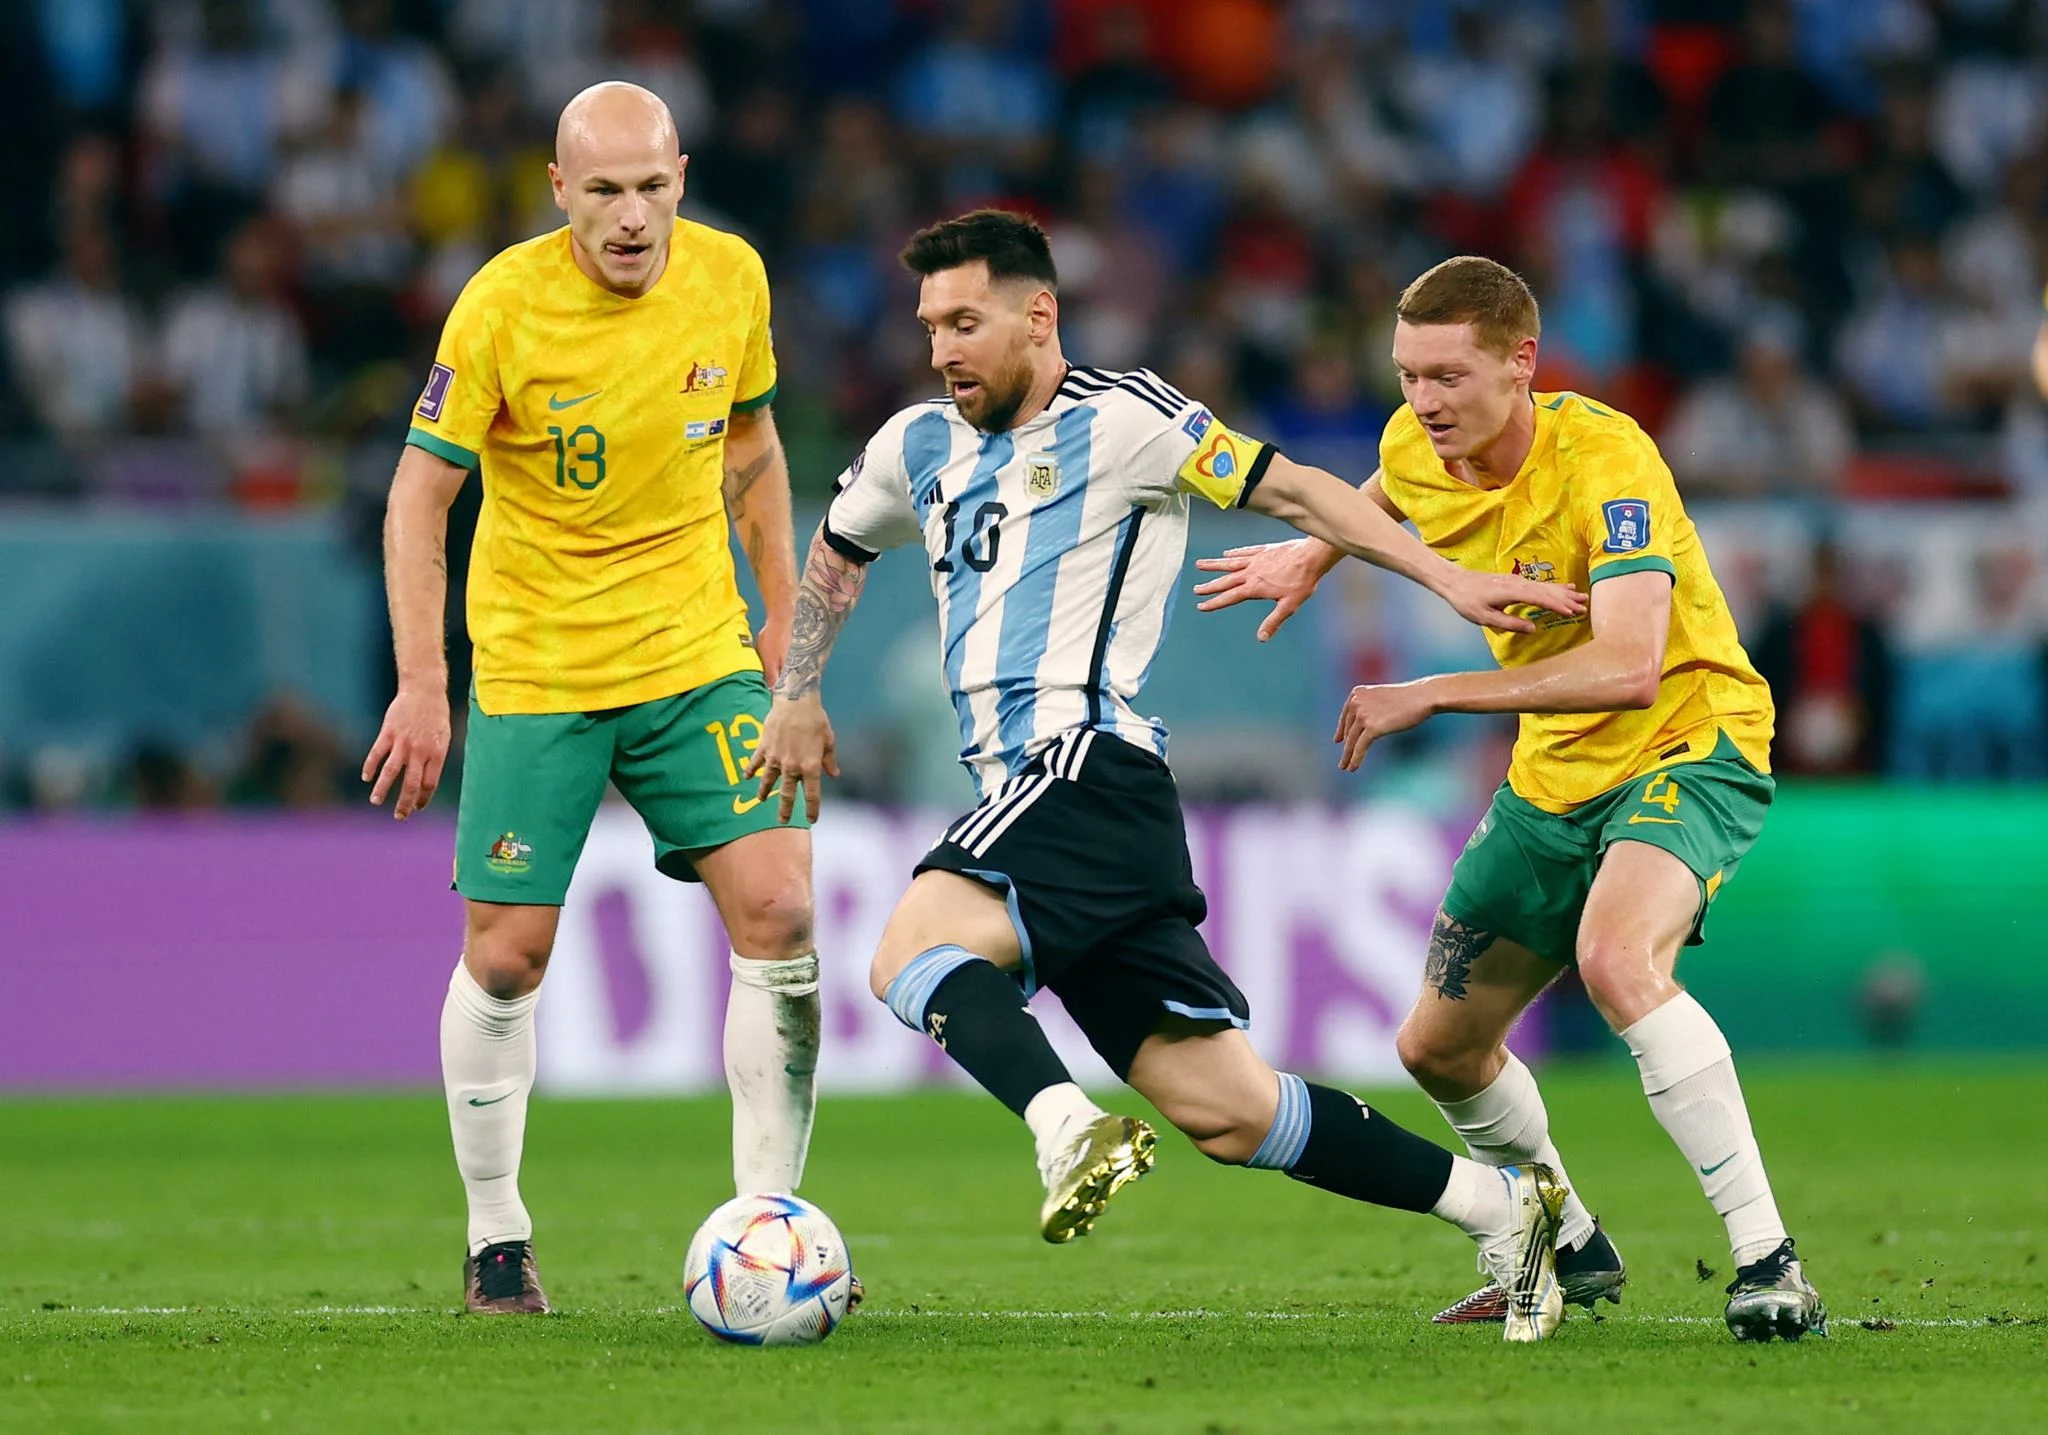 Australia found the discount and now Argentina wins 2-1 in the knockout stages of the Qatar 2022 World Cup